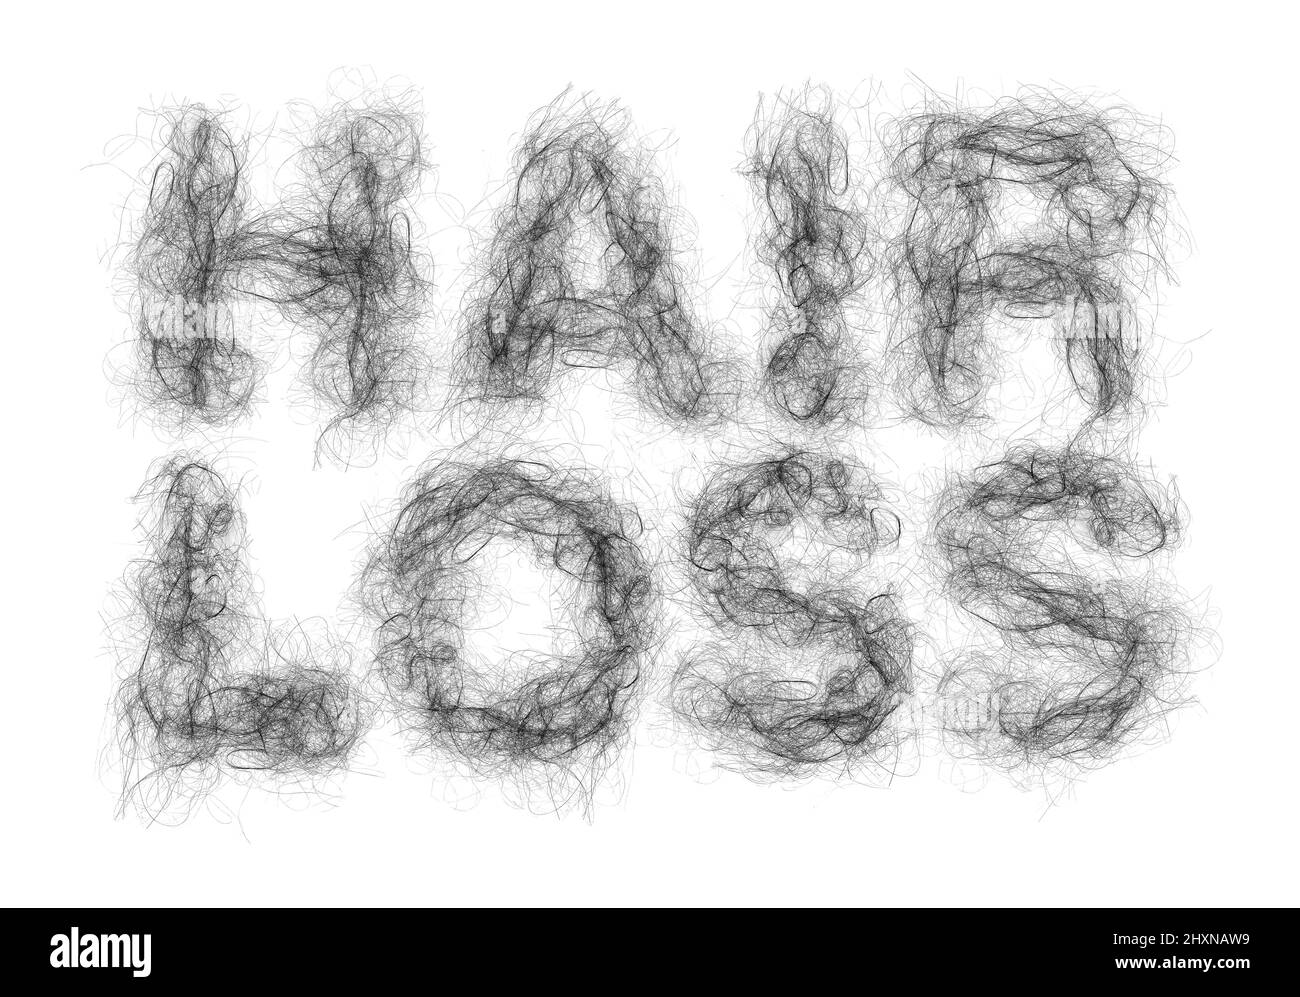 Hair loss or alopecia and balding medical concept as clumps of follicles shaped as text representing a receding hairline with thinning follicles. Stock Photo